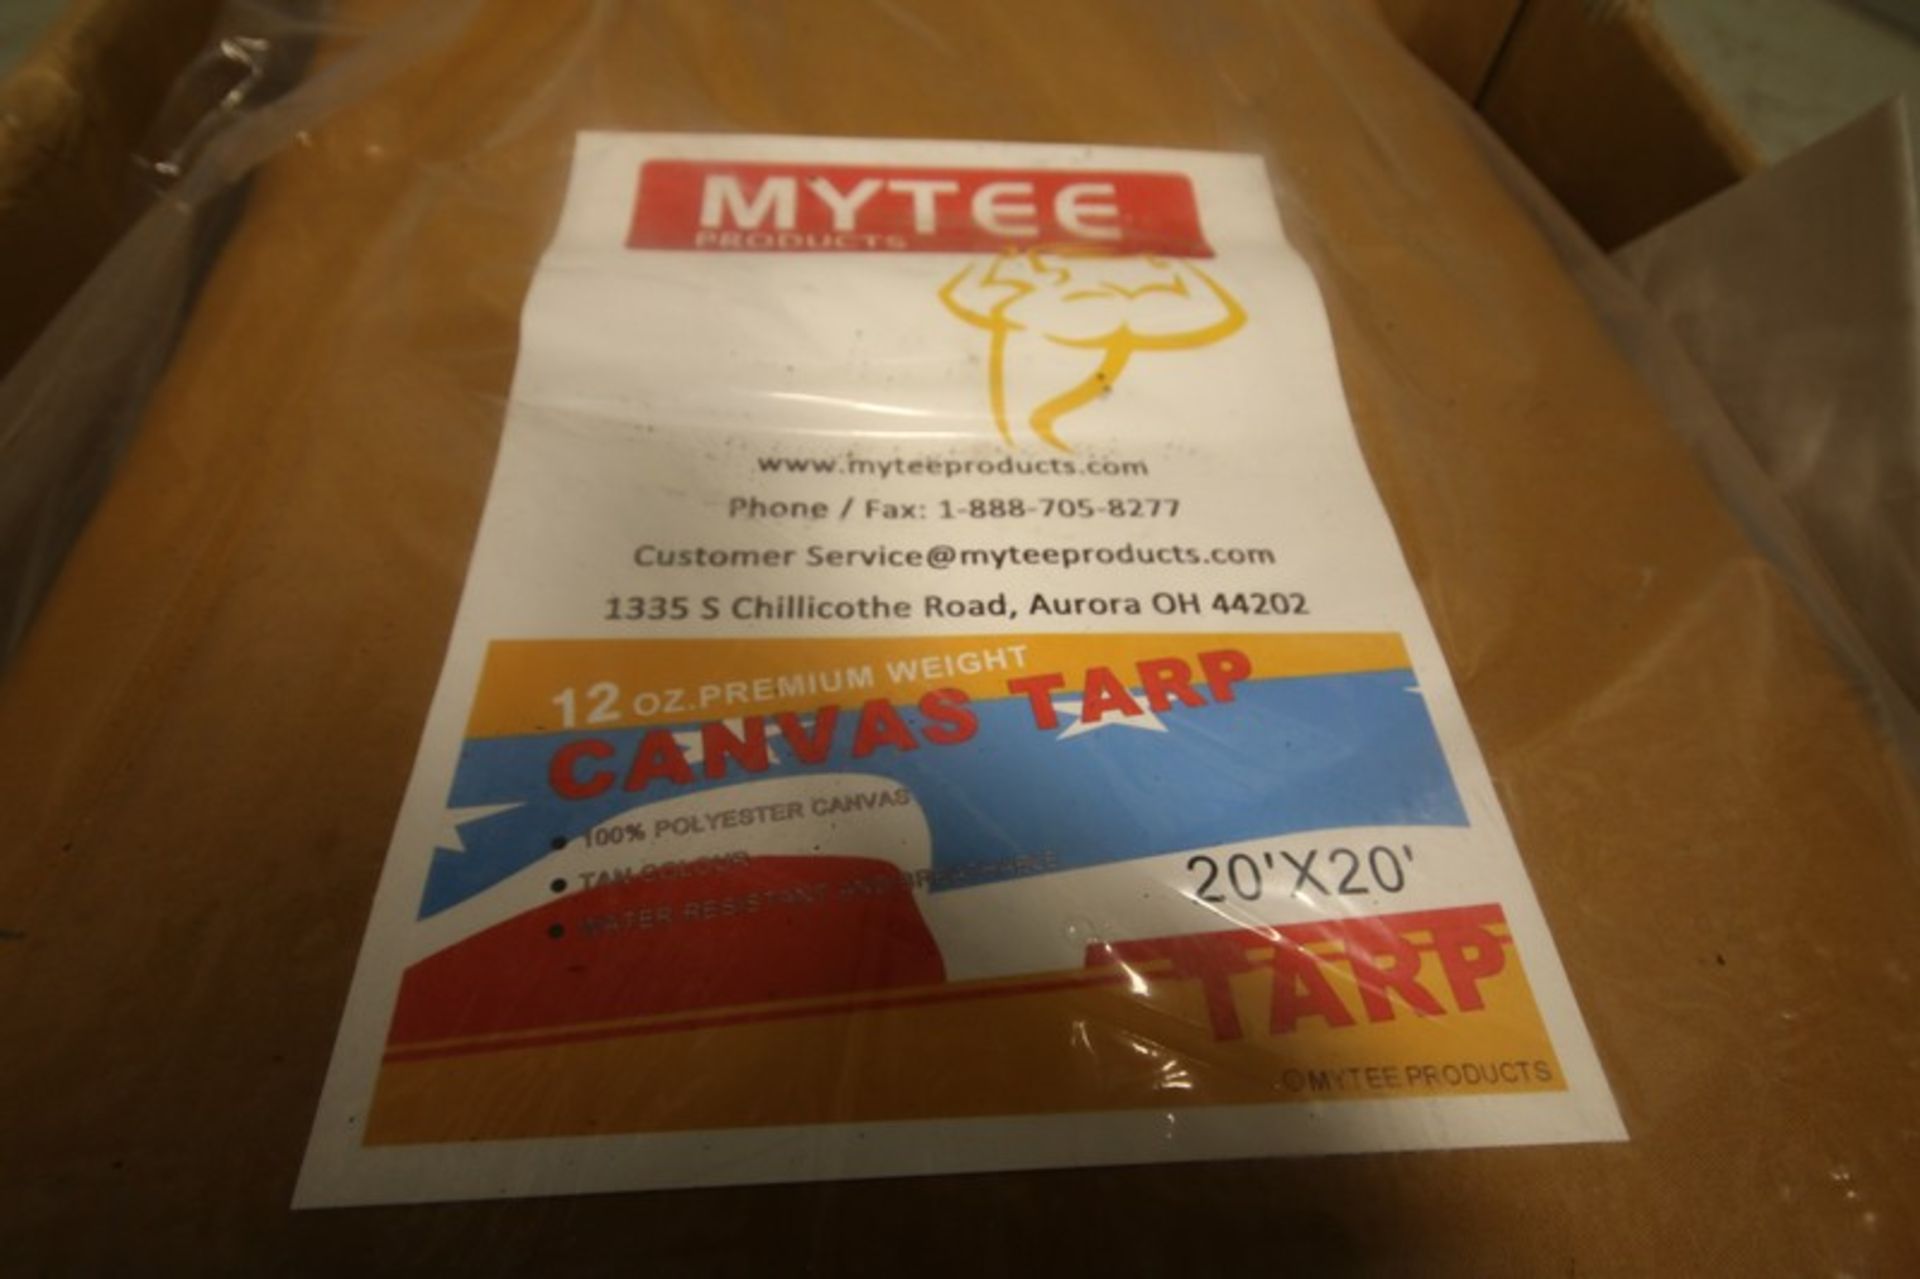 Mytee 20 x 20 New Canvas Tarp, 12 oz Weight, Order #VC484D (INV#66959) (Located @ the MDG Auction - Image 3 of 4